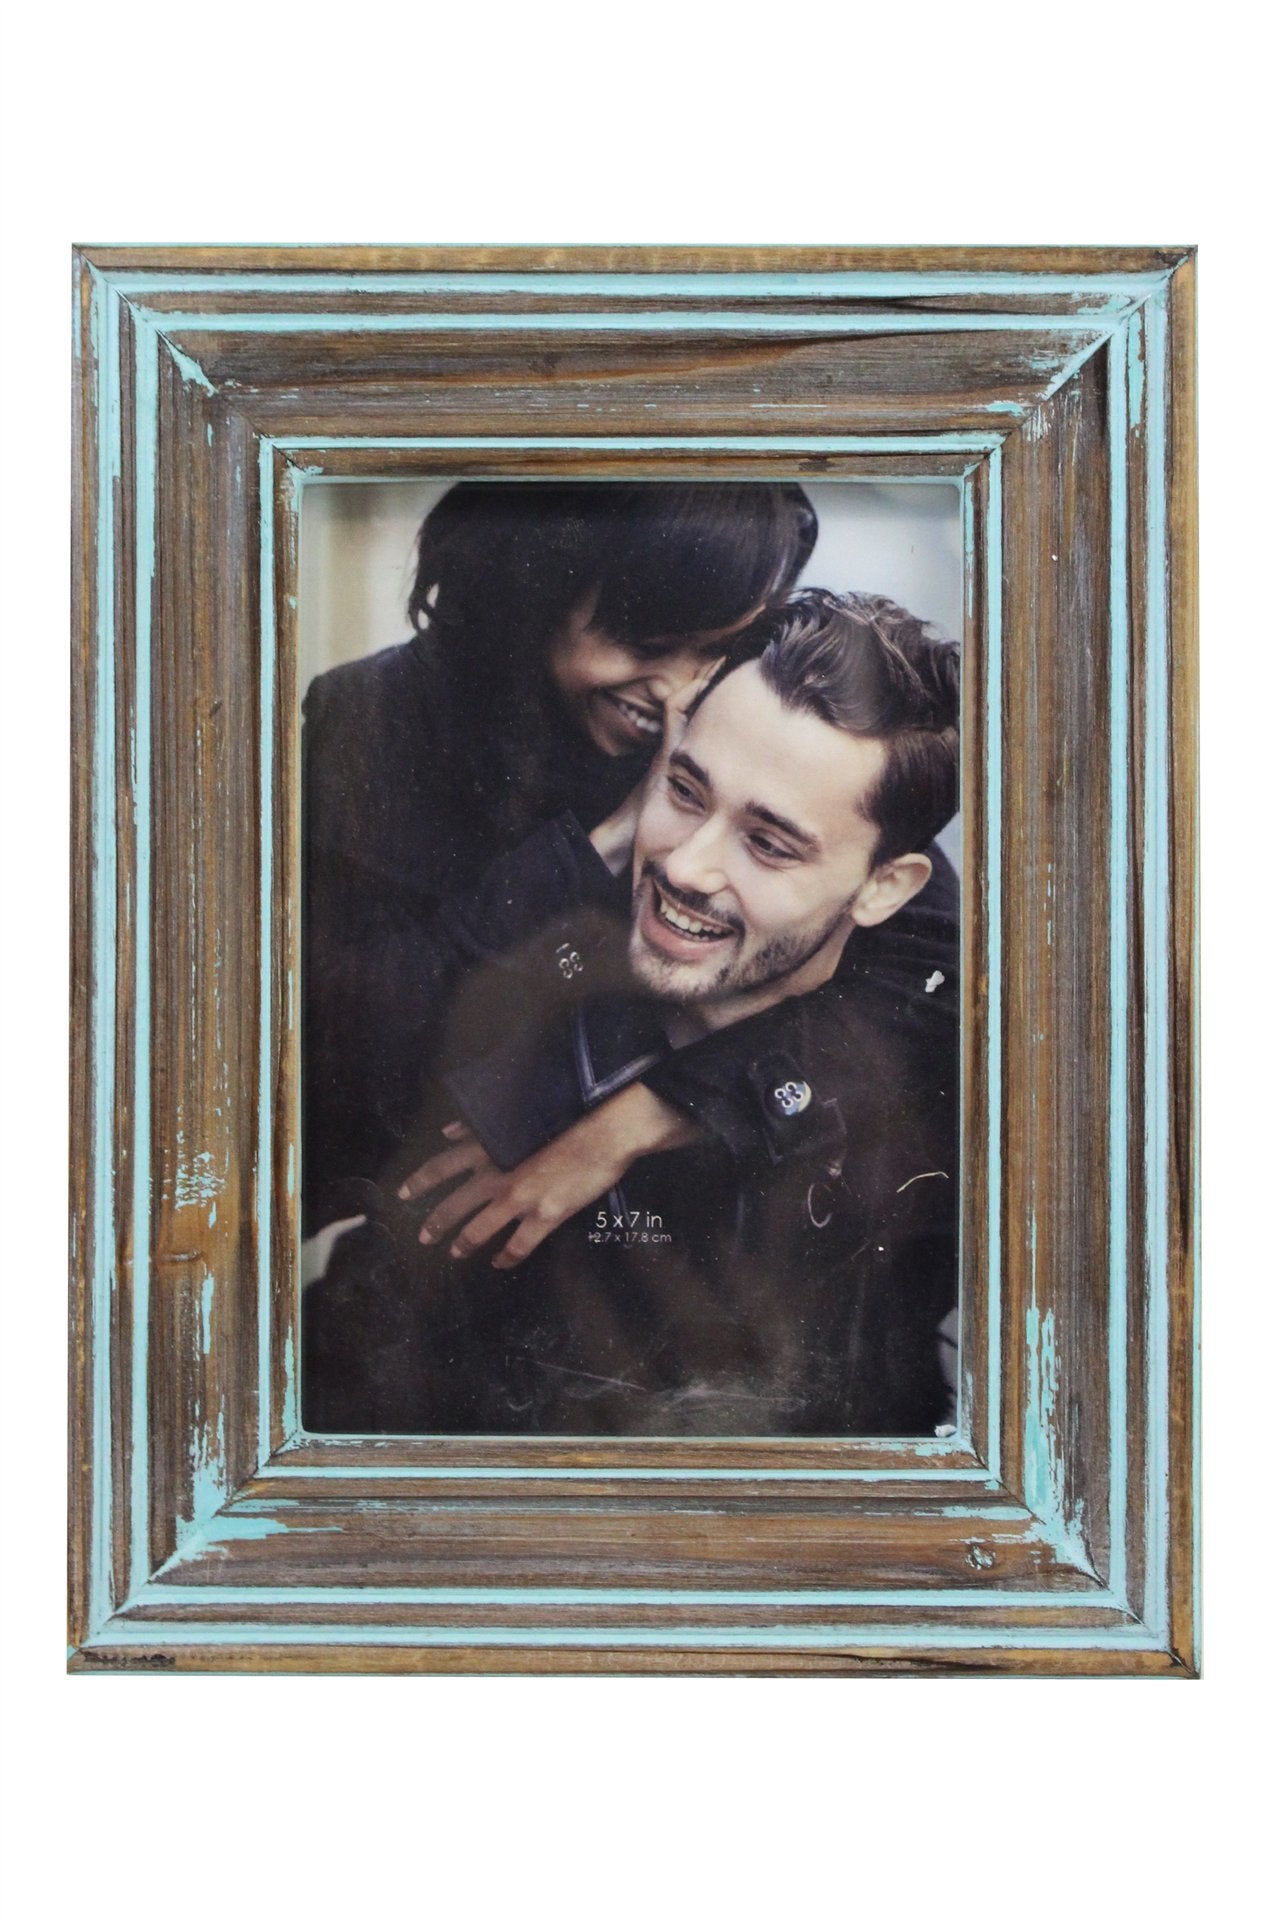 Blue washed Distressed Wood Frame~ 5 x 7” photo